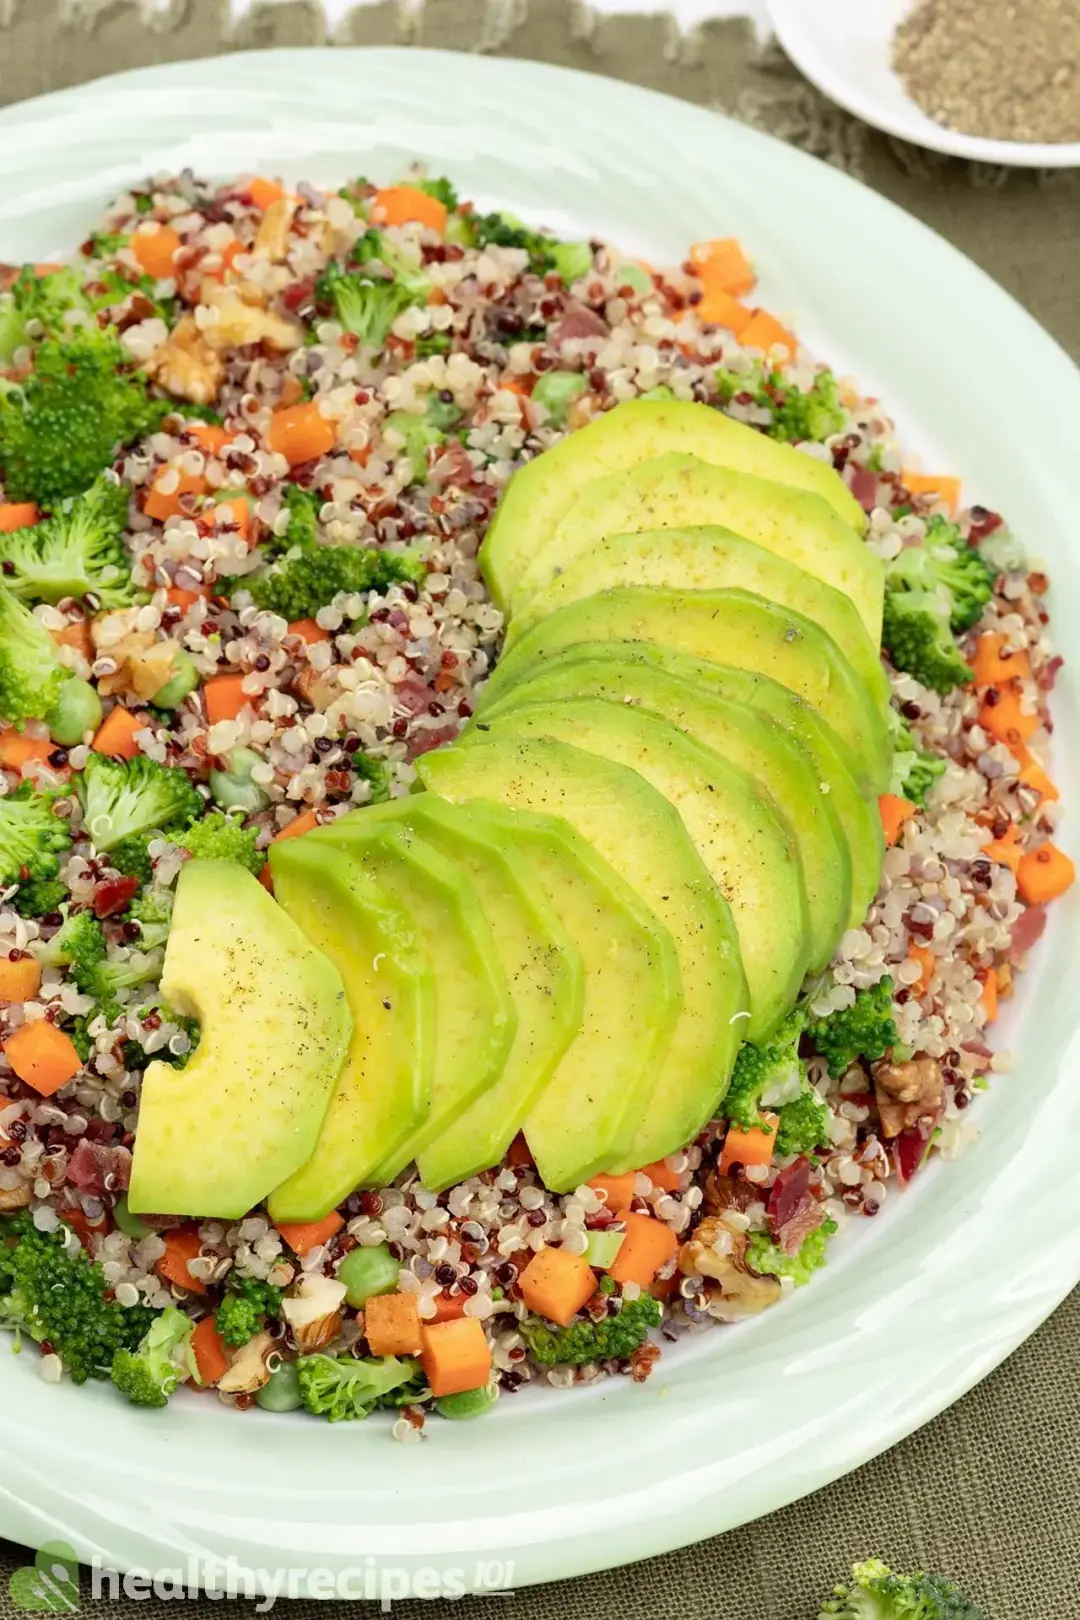 A colorful quinoa salad with sliced avocados on top.